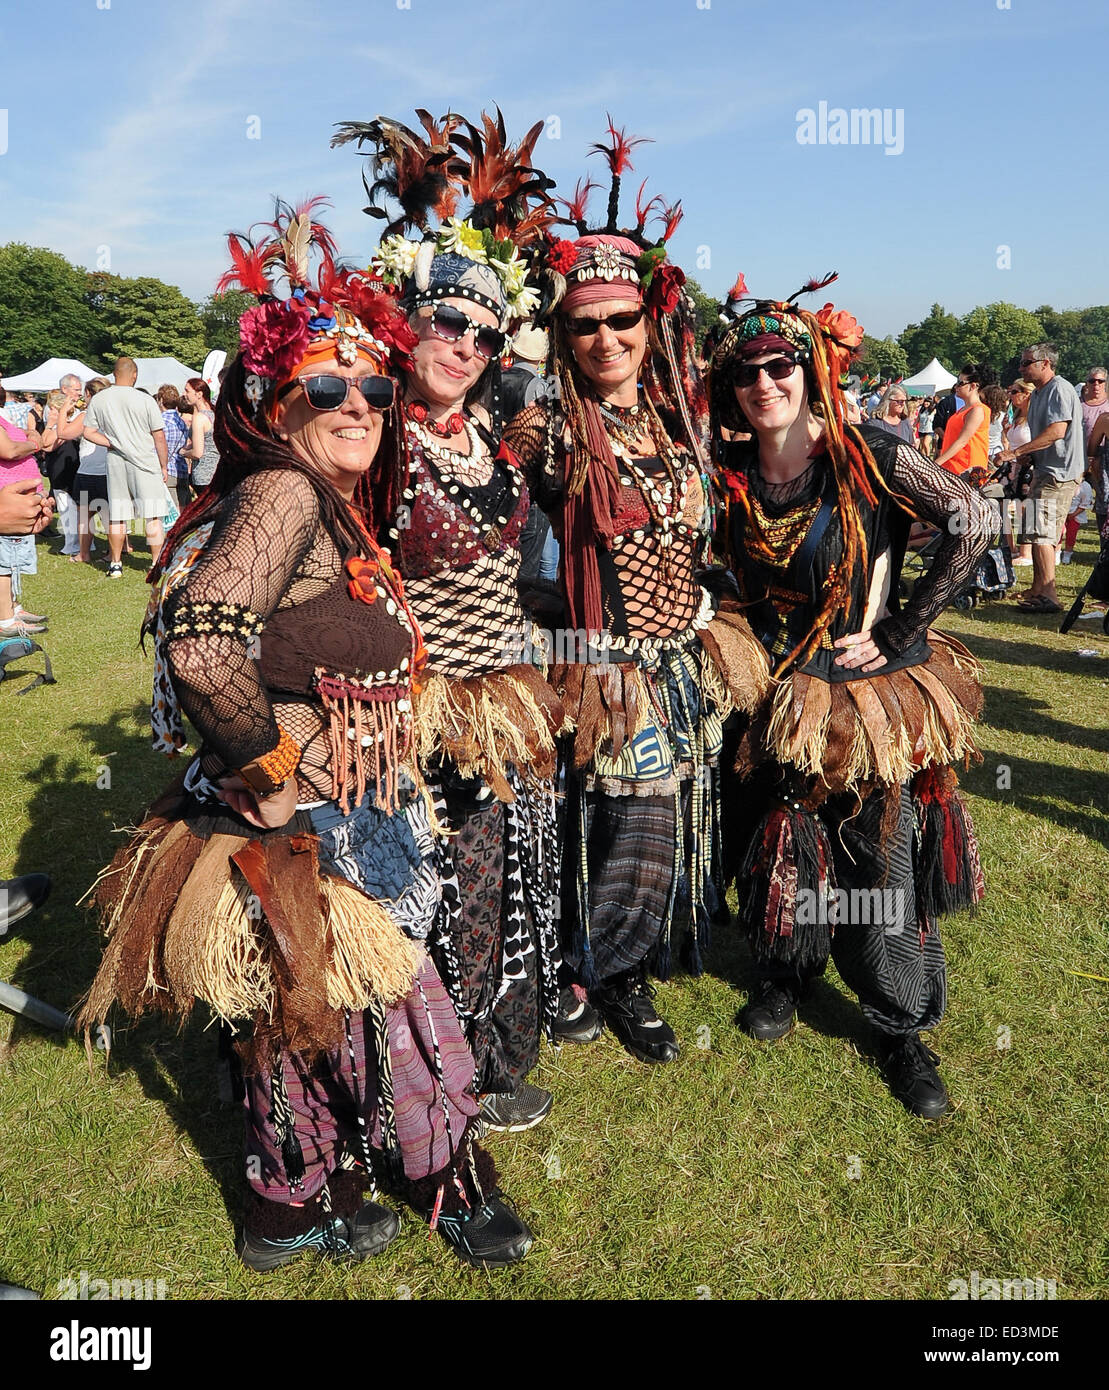 Africa Oye festival at Sefton Park is the UK's largest free festival which celebrates African culture and music  Where: Liverpool, United Kingdom When: 22 Jun 2014 Stock Photo